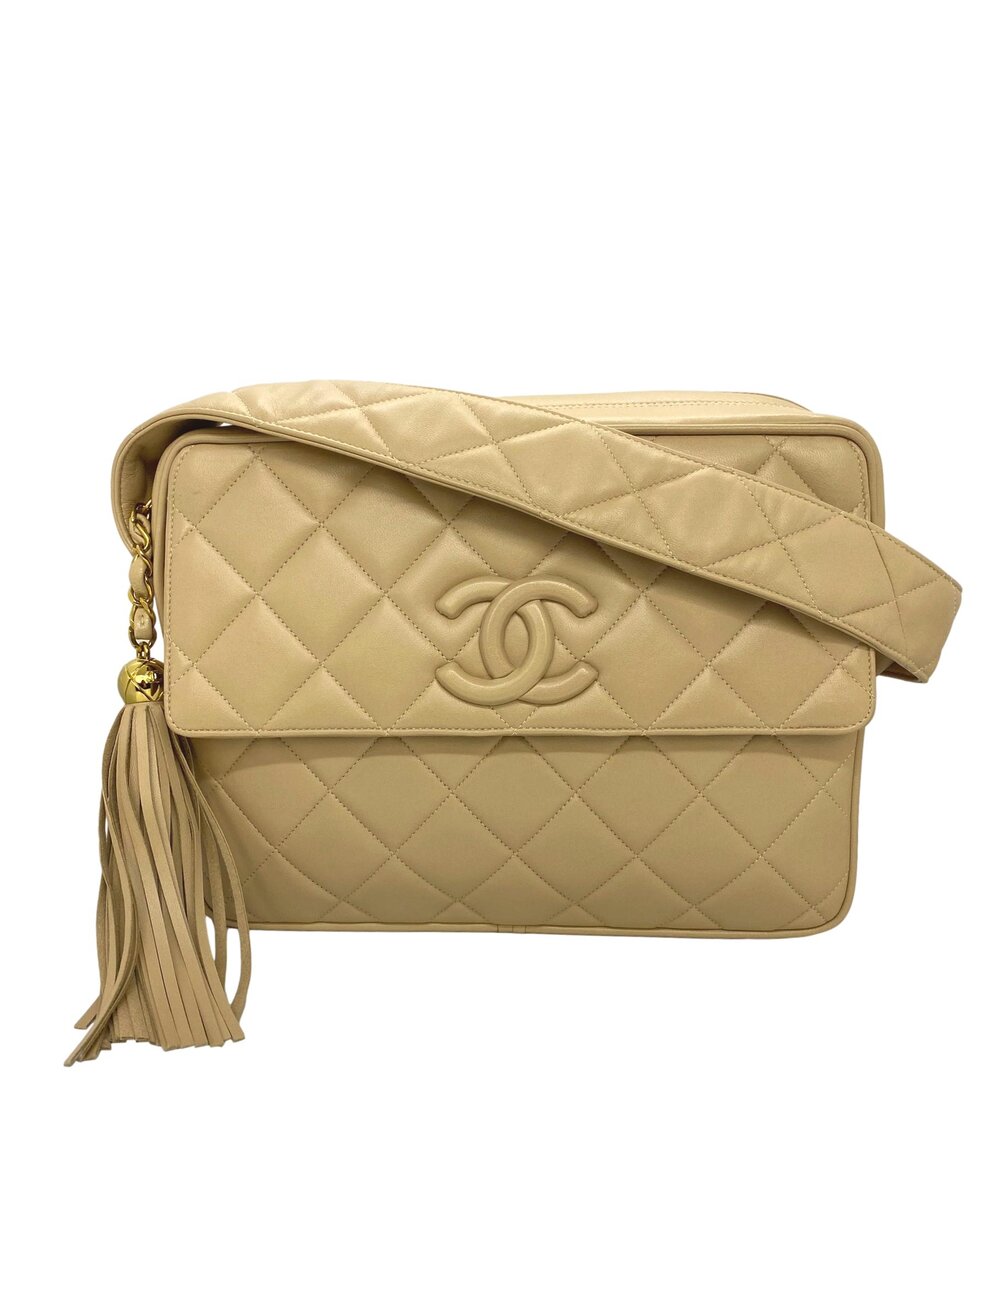 Chanel Vintage Beige Quilted Lambskin Leather Camera Bag with